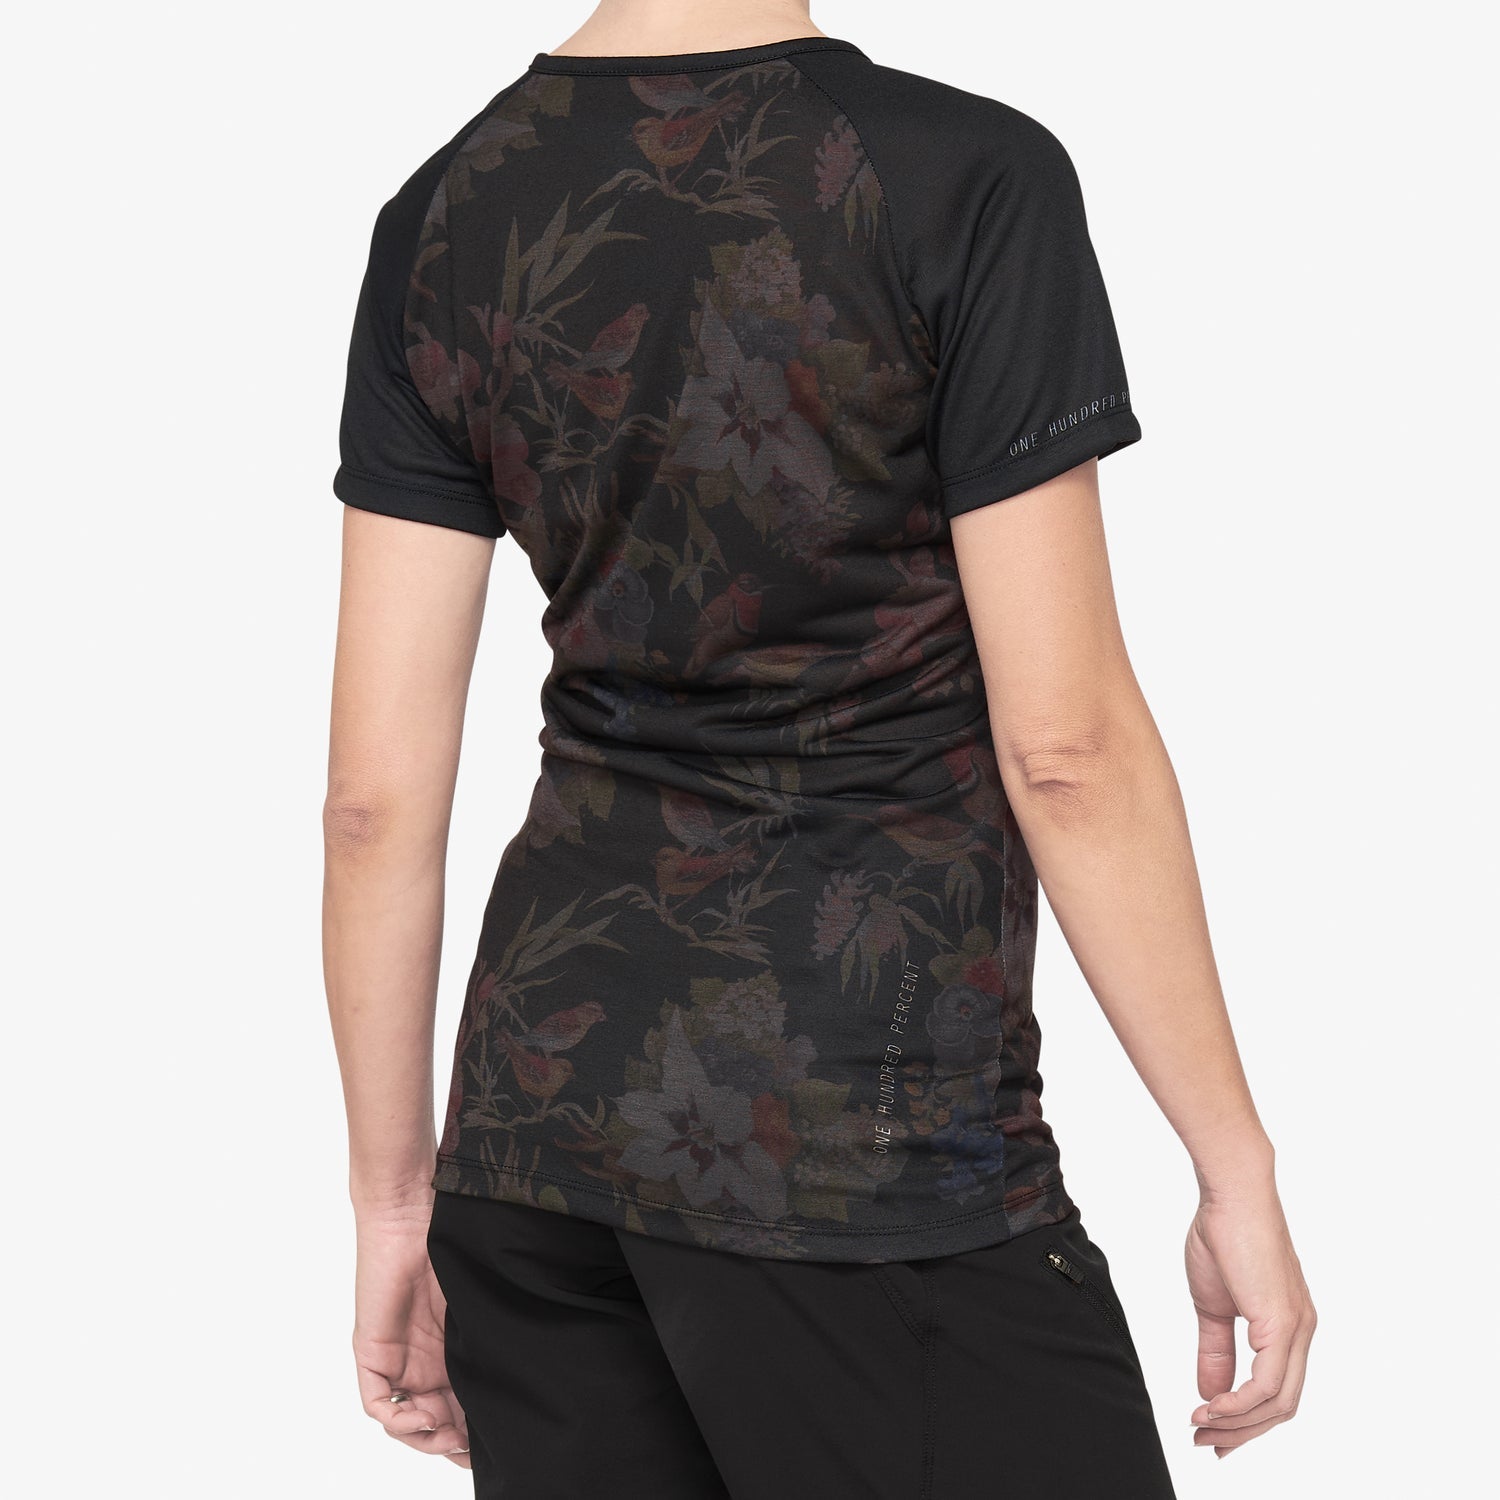 Airmatic womens jersey black floral